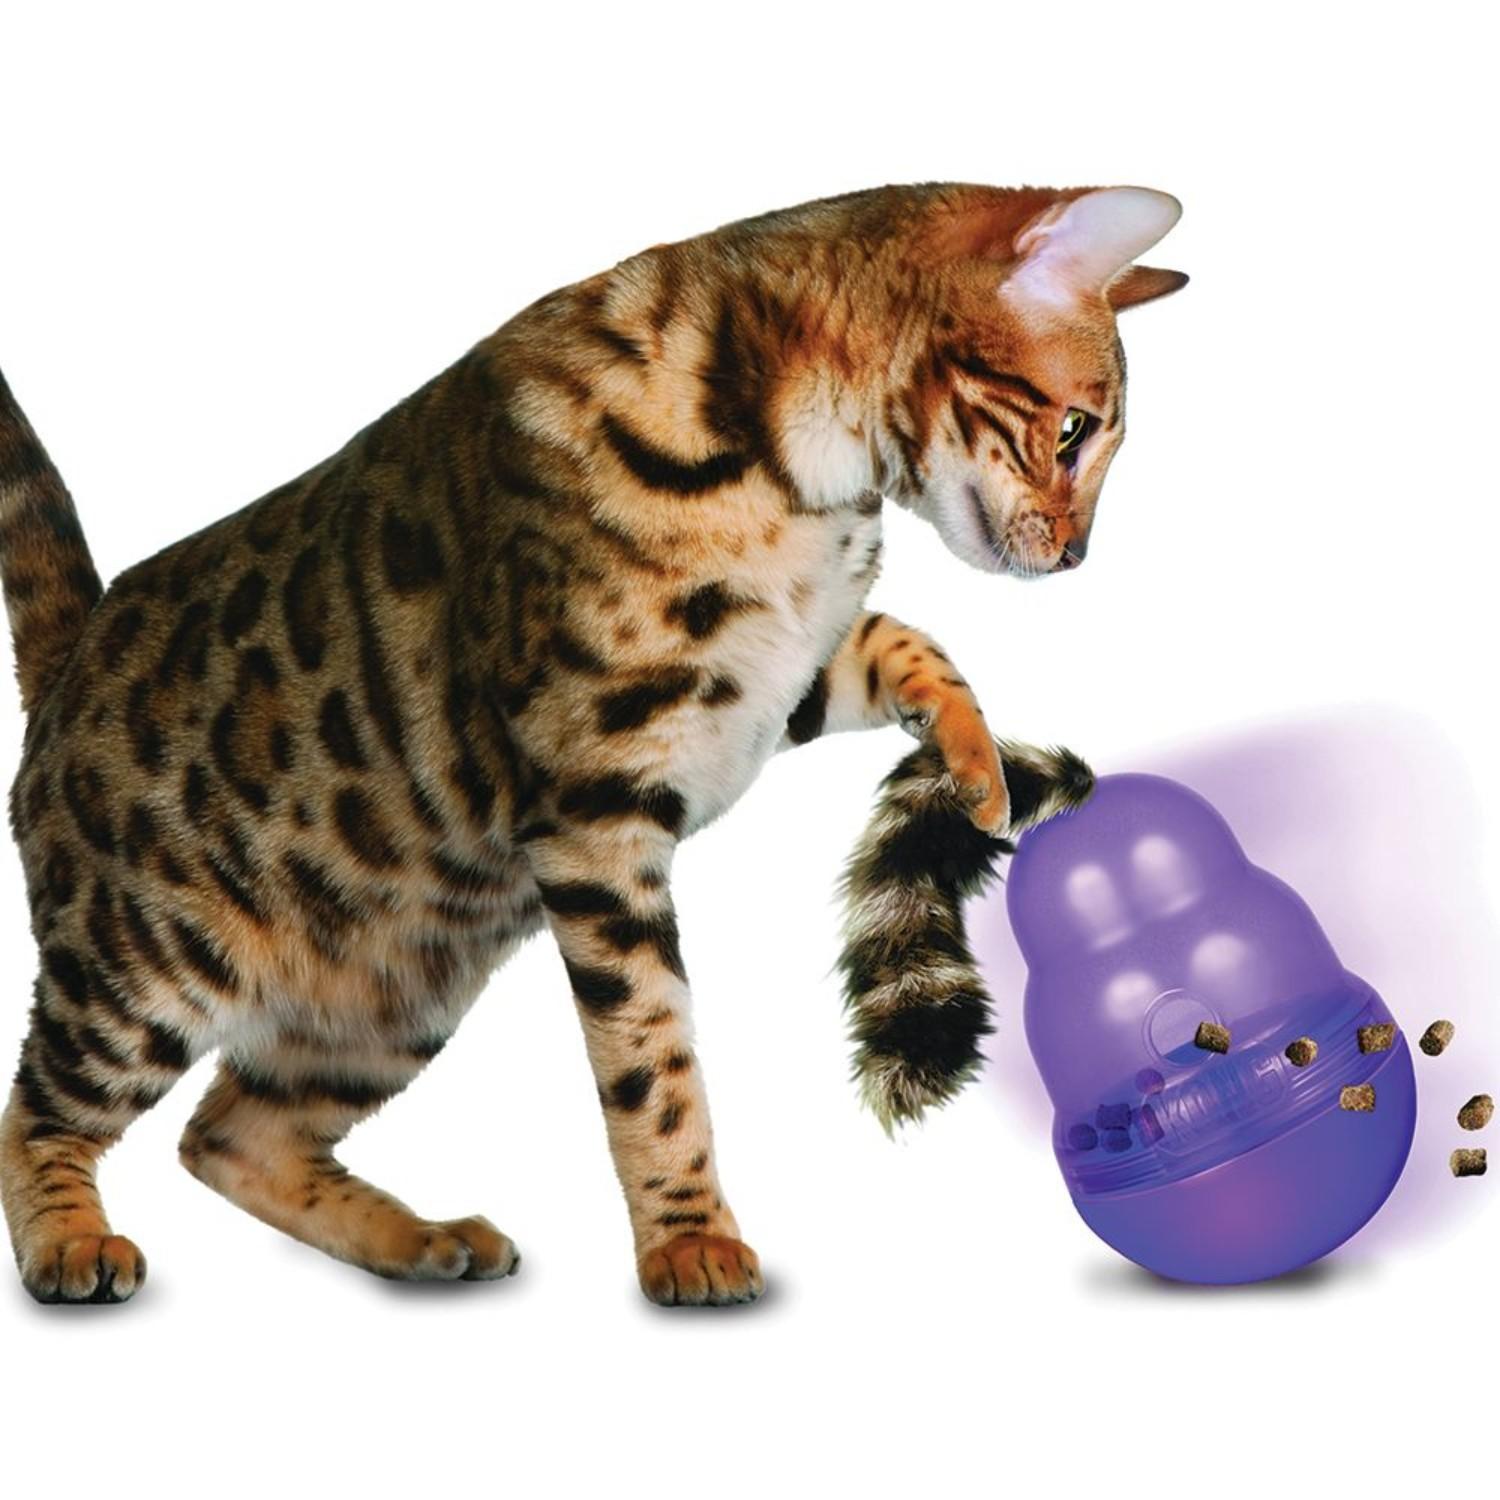 https://images.baxterboo.com/global/images/products/large/kong-wobbler-cat-toy-purple-1371.jpg